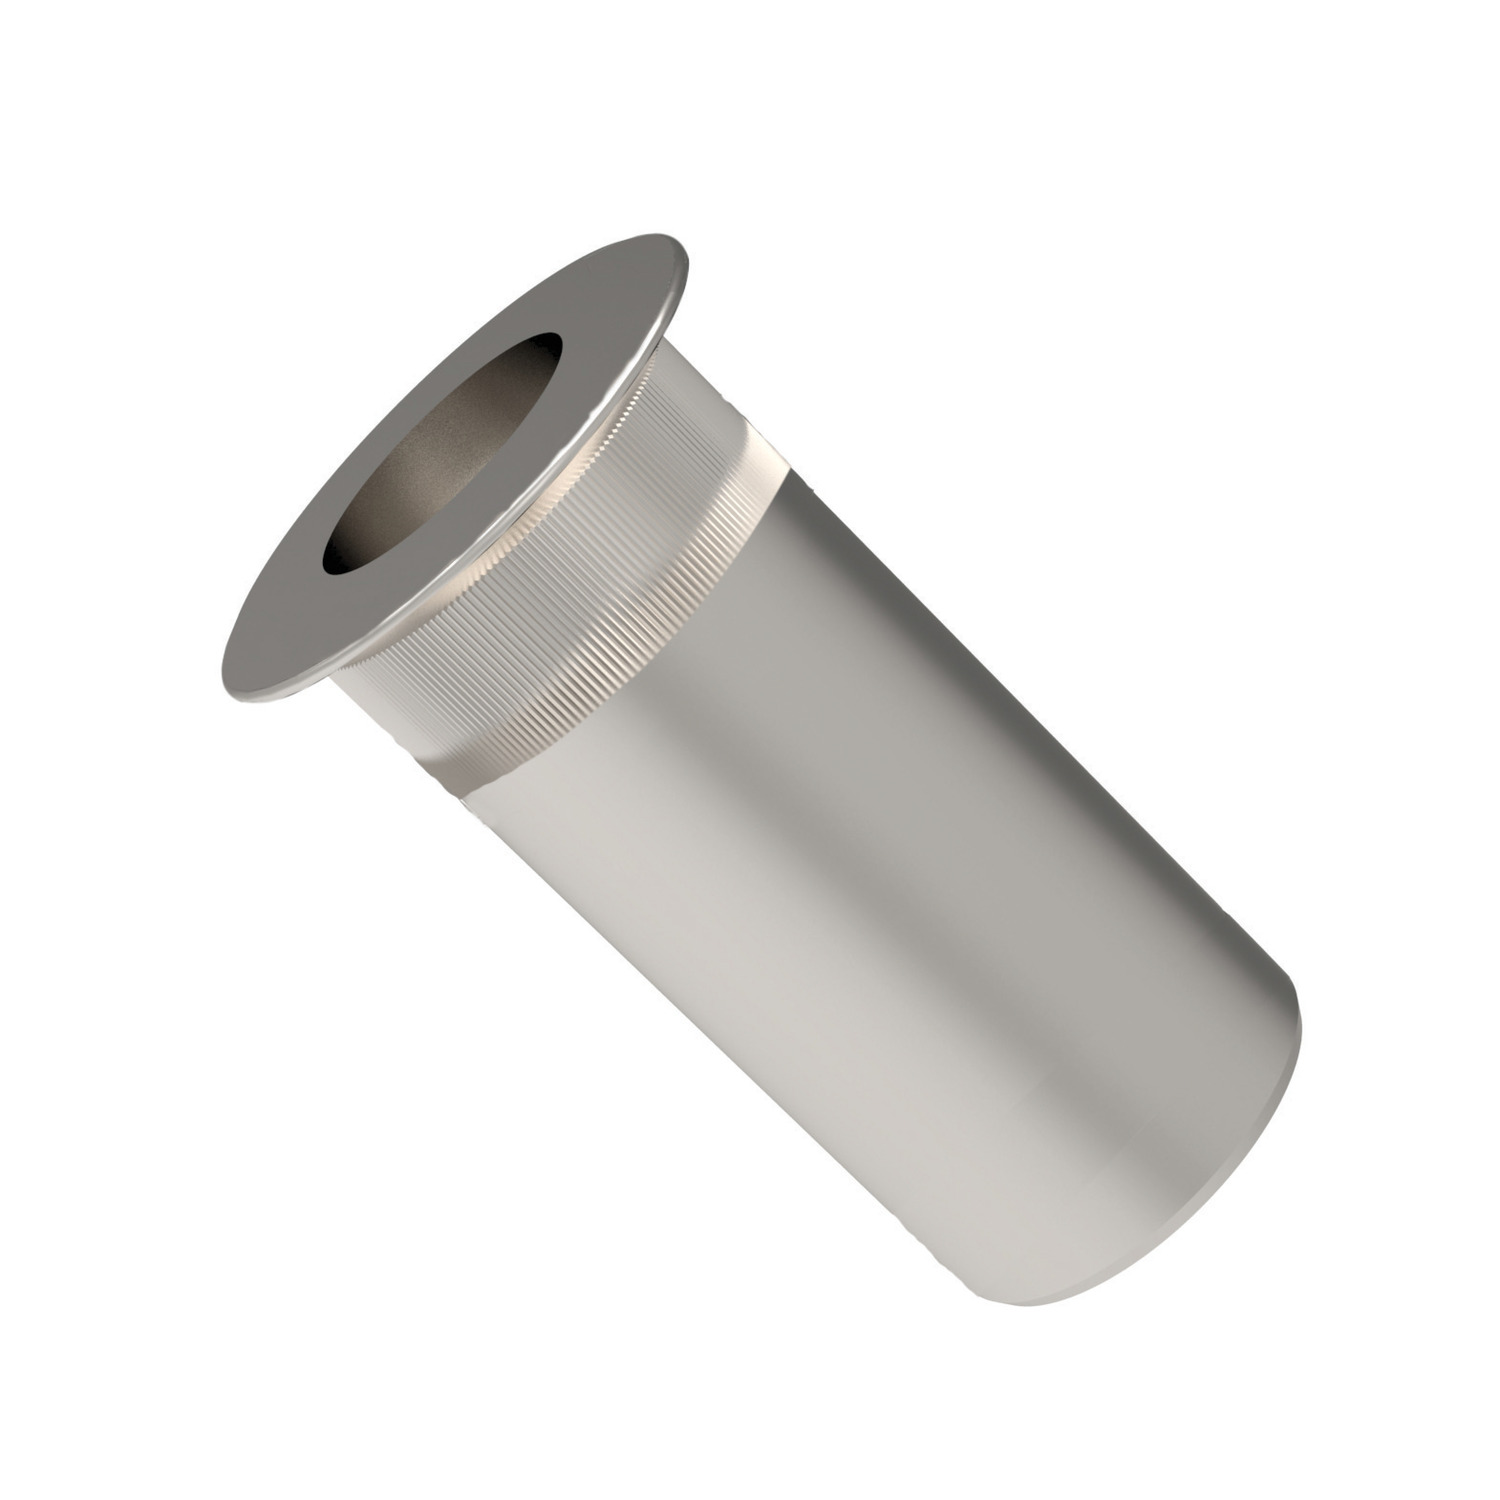 P0820.A2 - Flange Head Knurled Insert Nuts